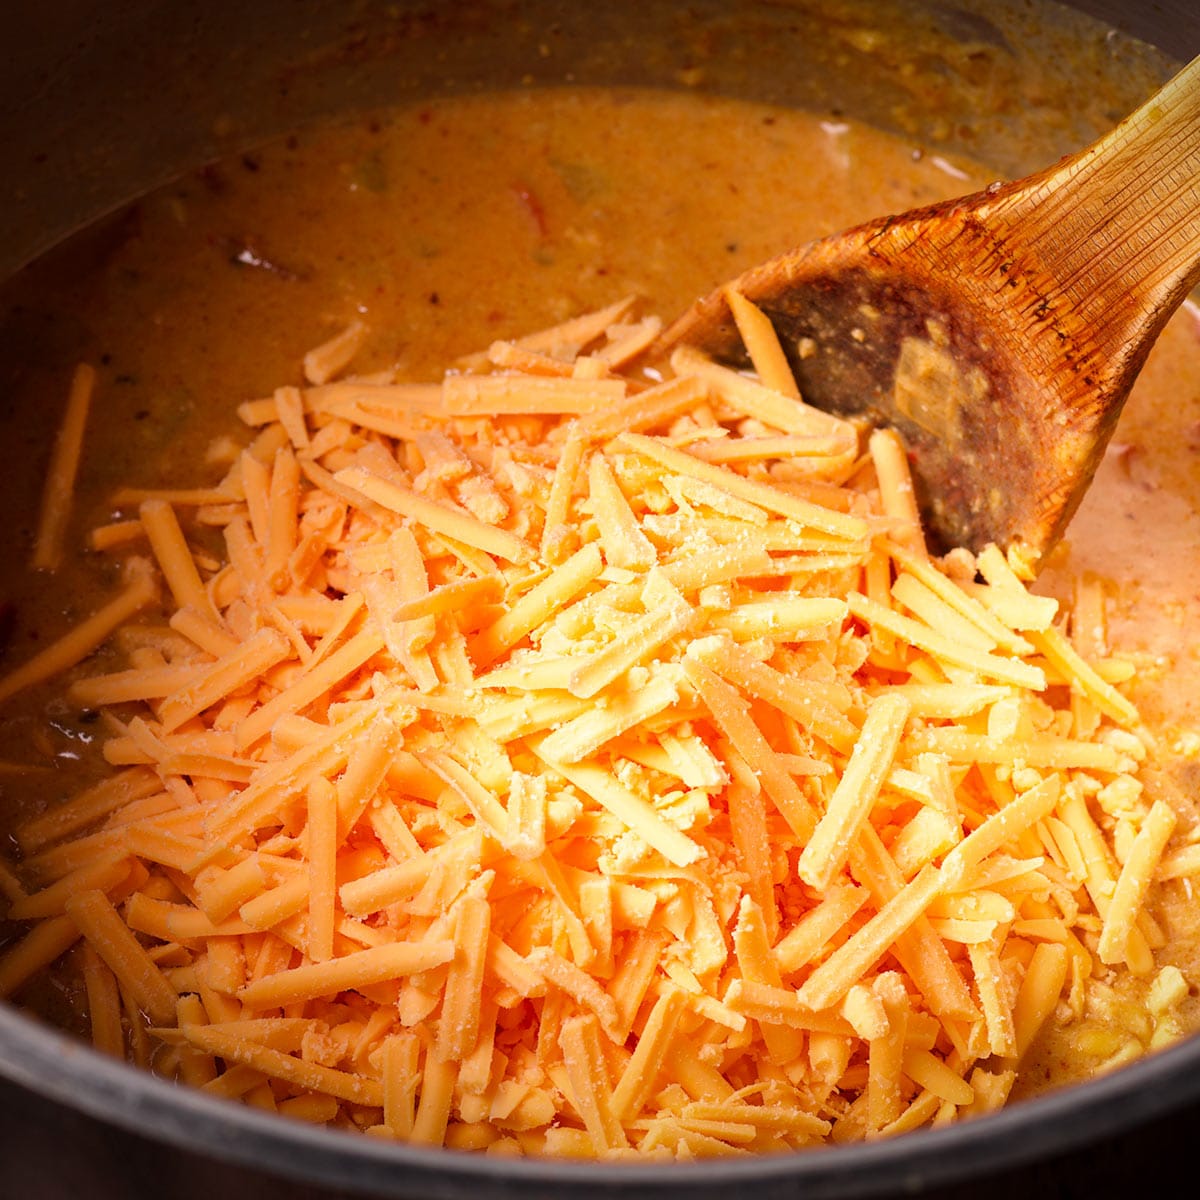 Add shredded cheddar cheese to the soup and stir until it's melted.